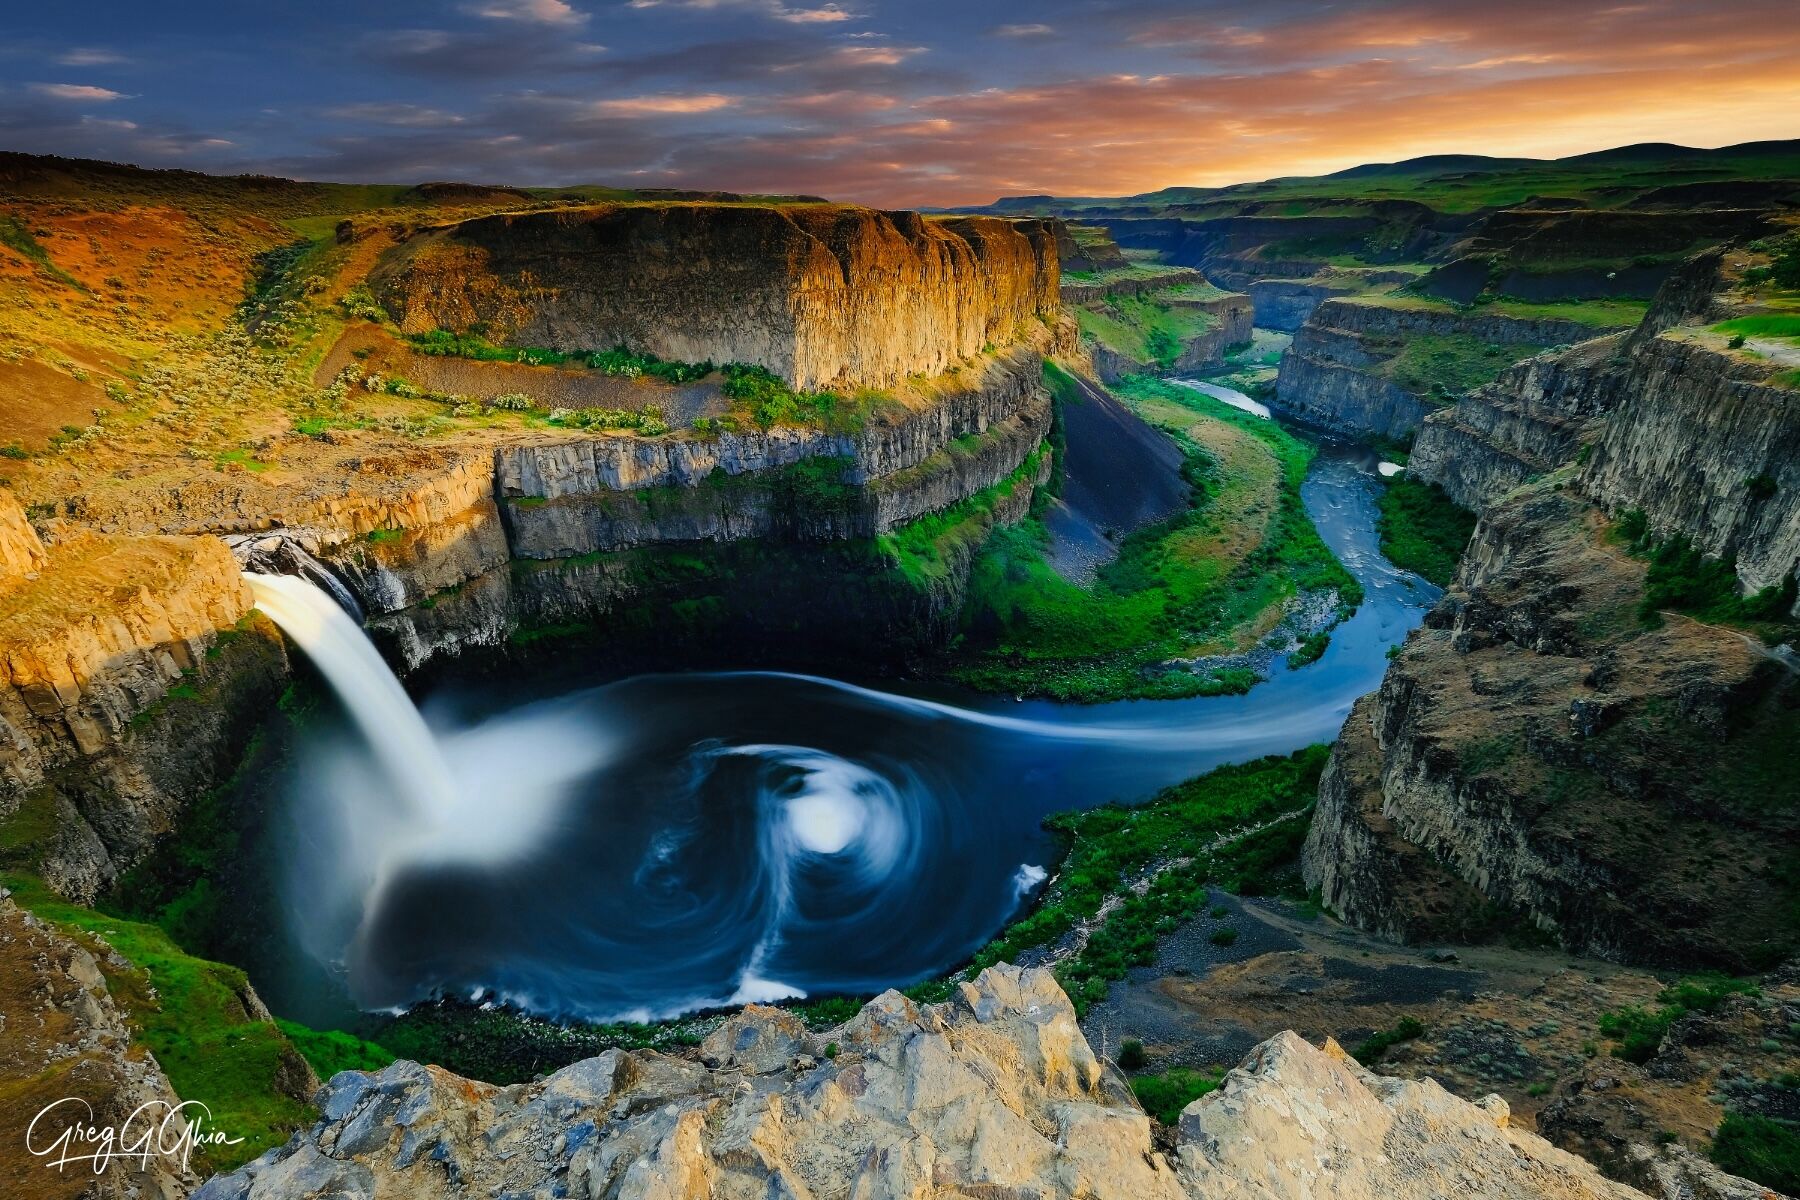 Palouse Falls being fed by Lake Missoula is one of the wonders of America.